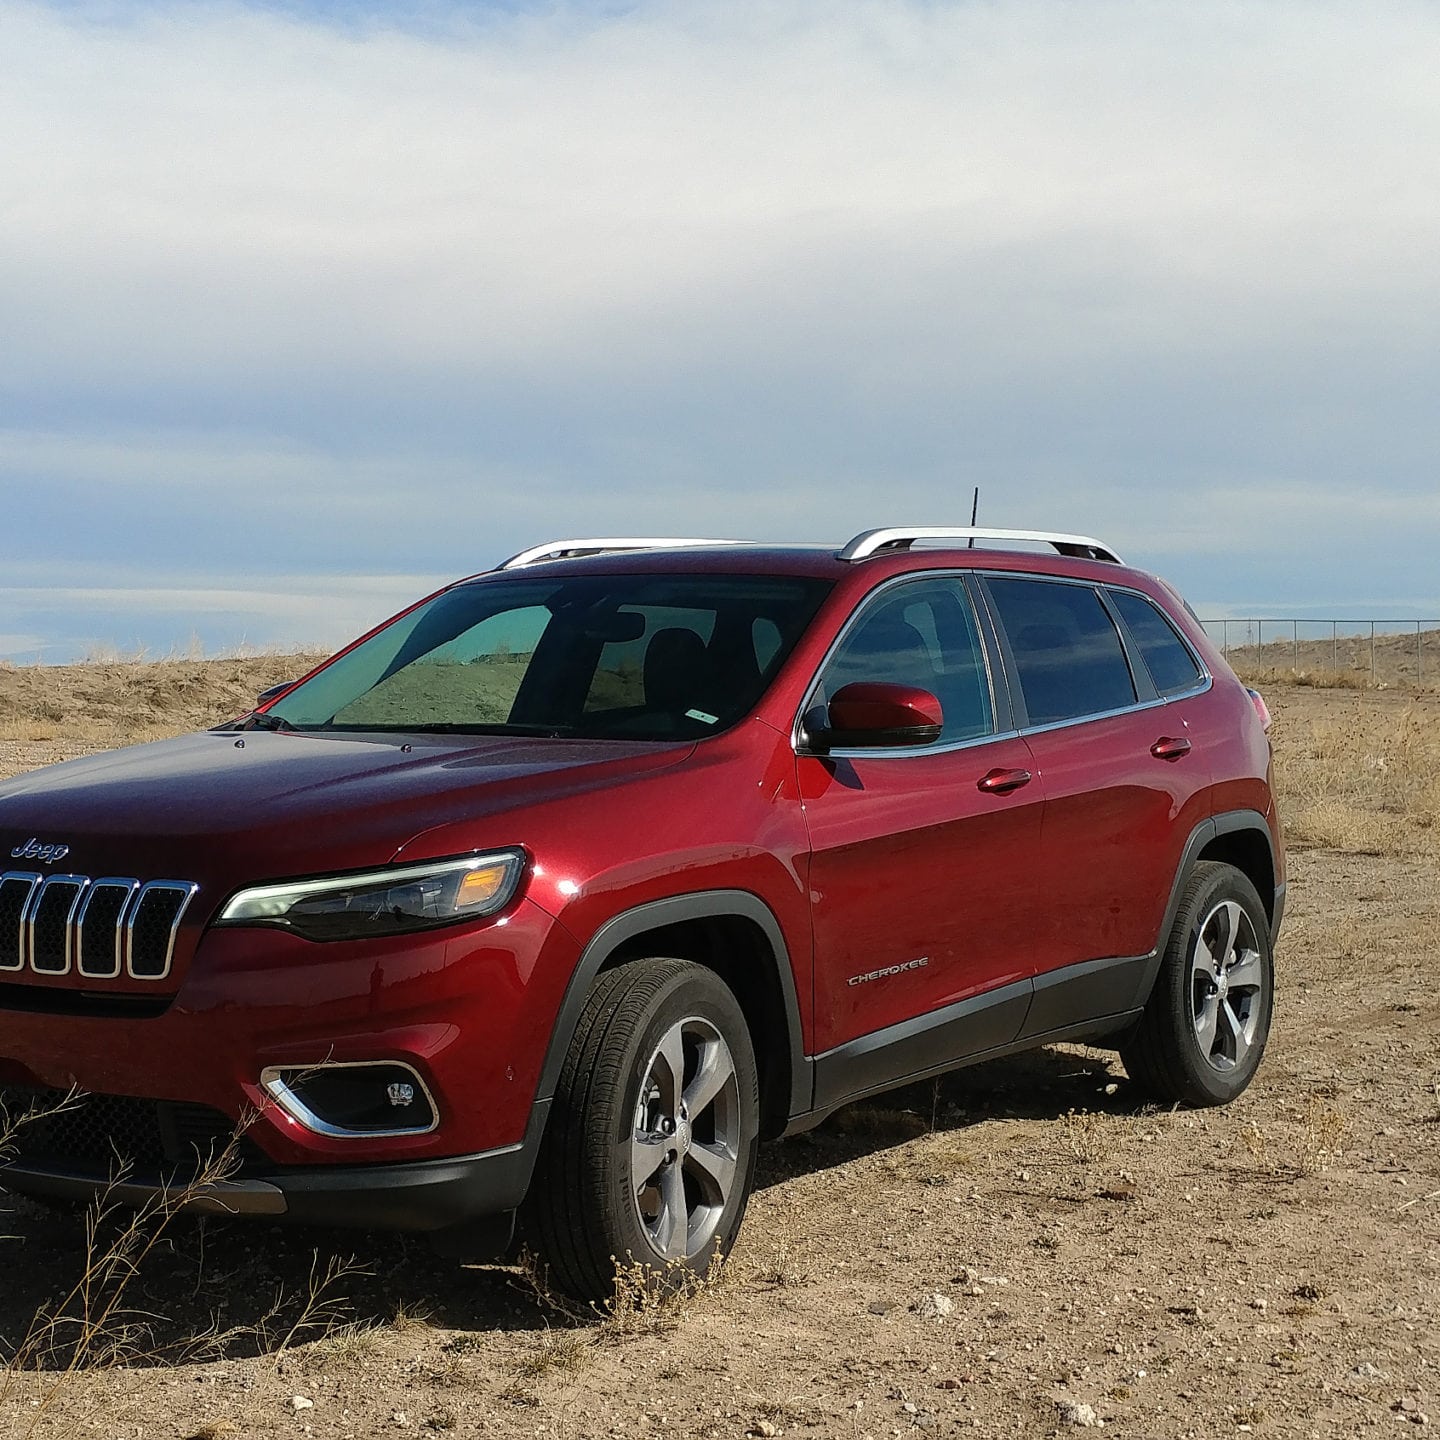 2019 Jeep Cherokee is All-New With the Same Awesomeness